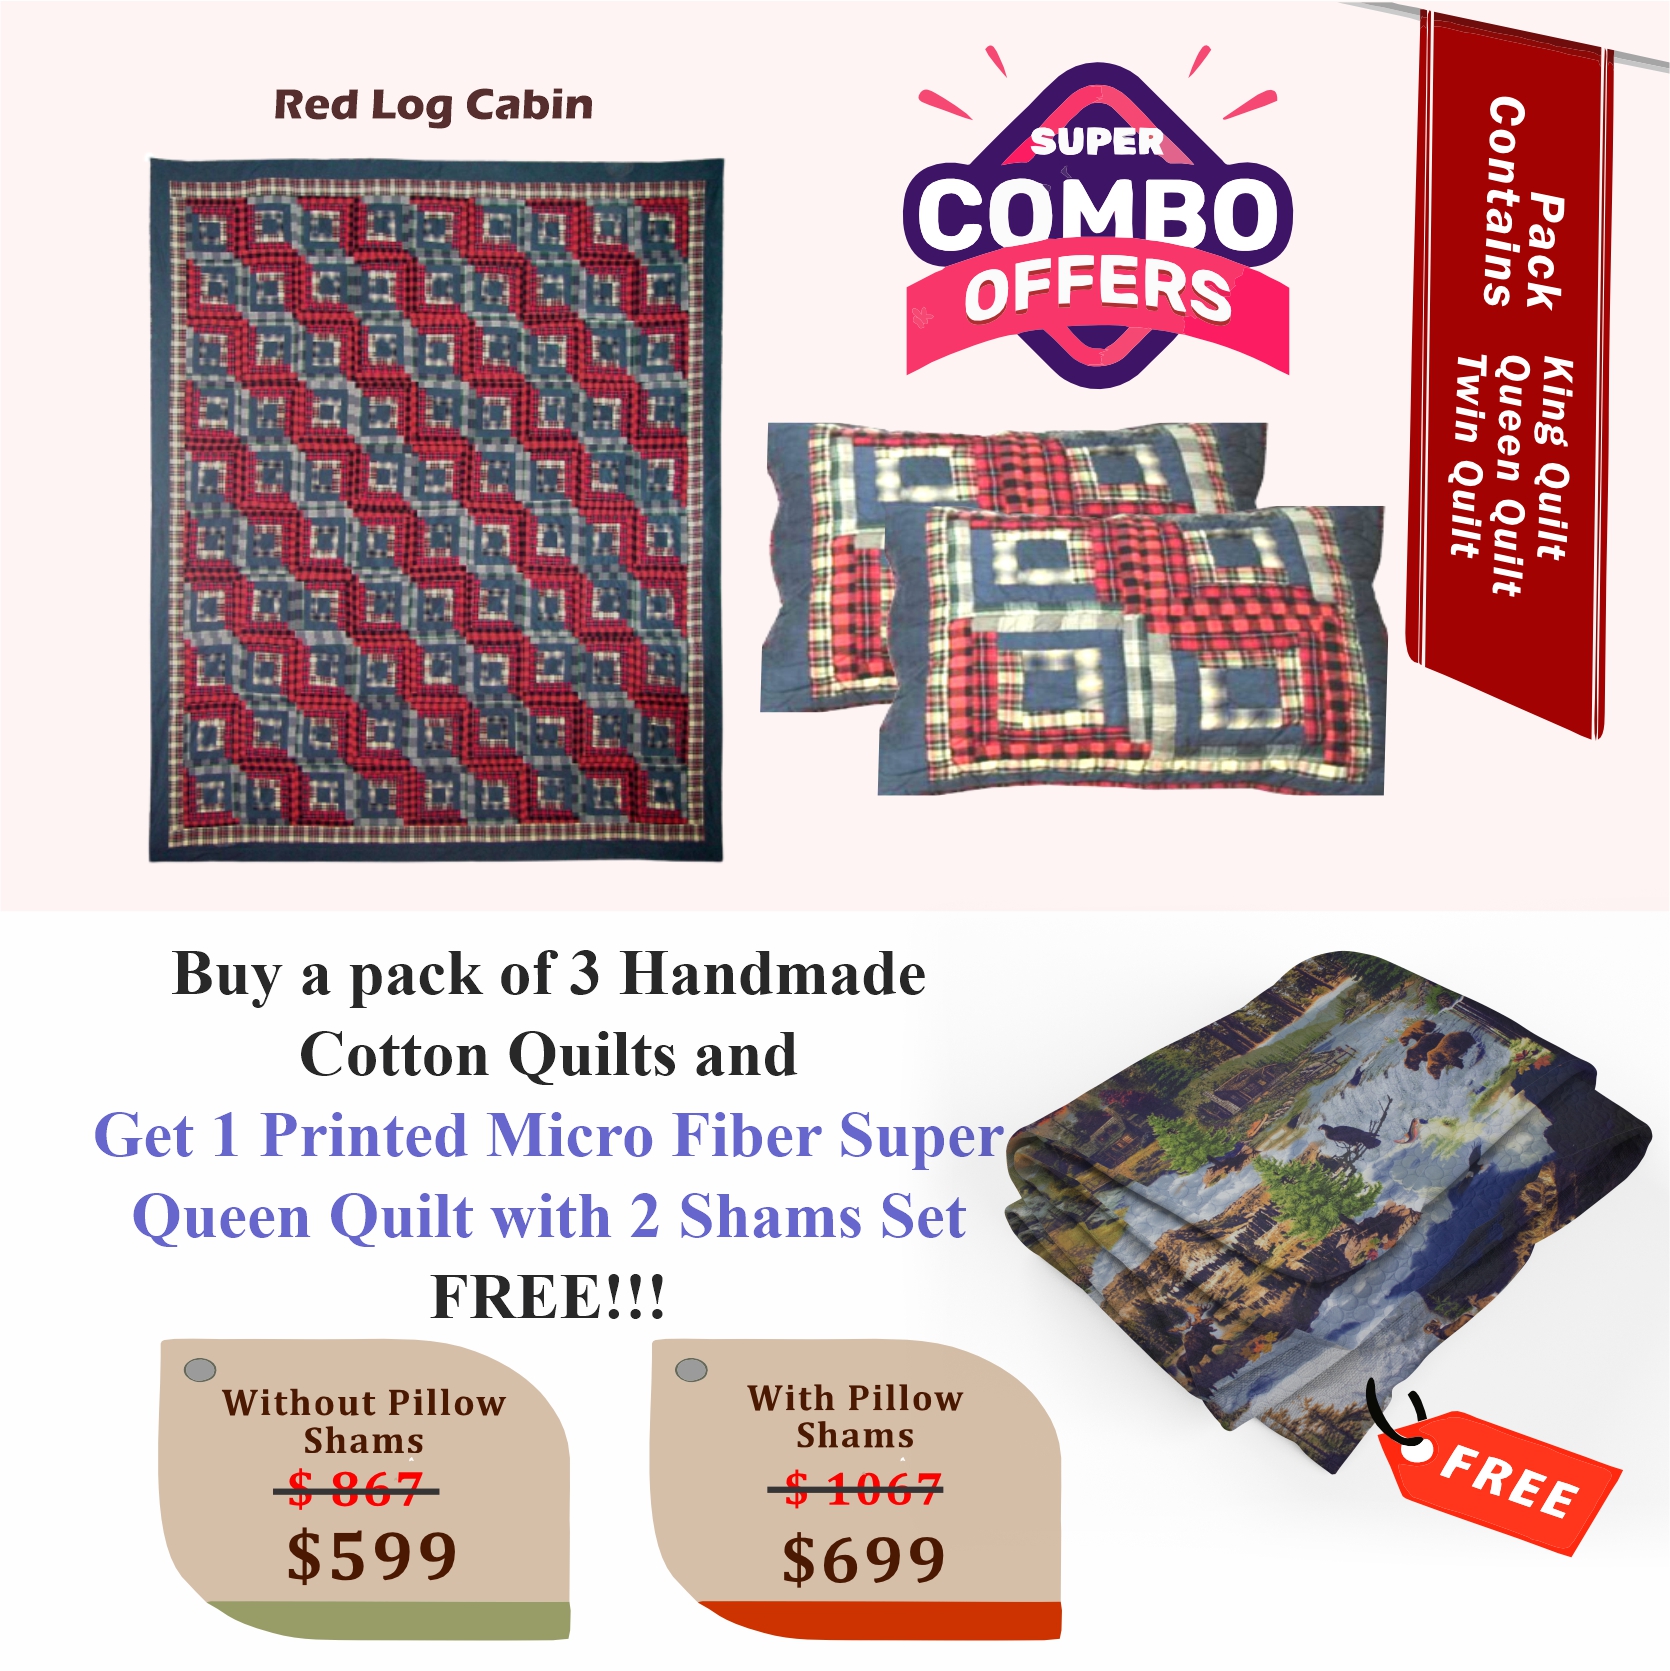 Red Log Cabin - Handmade Cotton quilts   | Buy 3 cotton quilts and get 1 Printed Microfiber Super Queen Quilt with 2 Shams set FREE